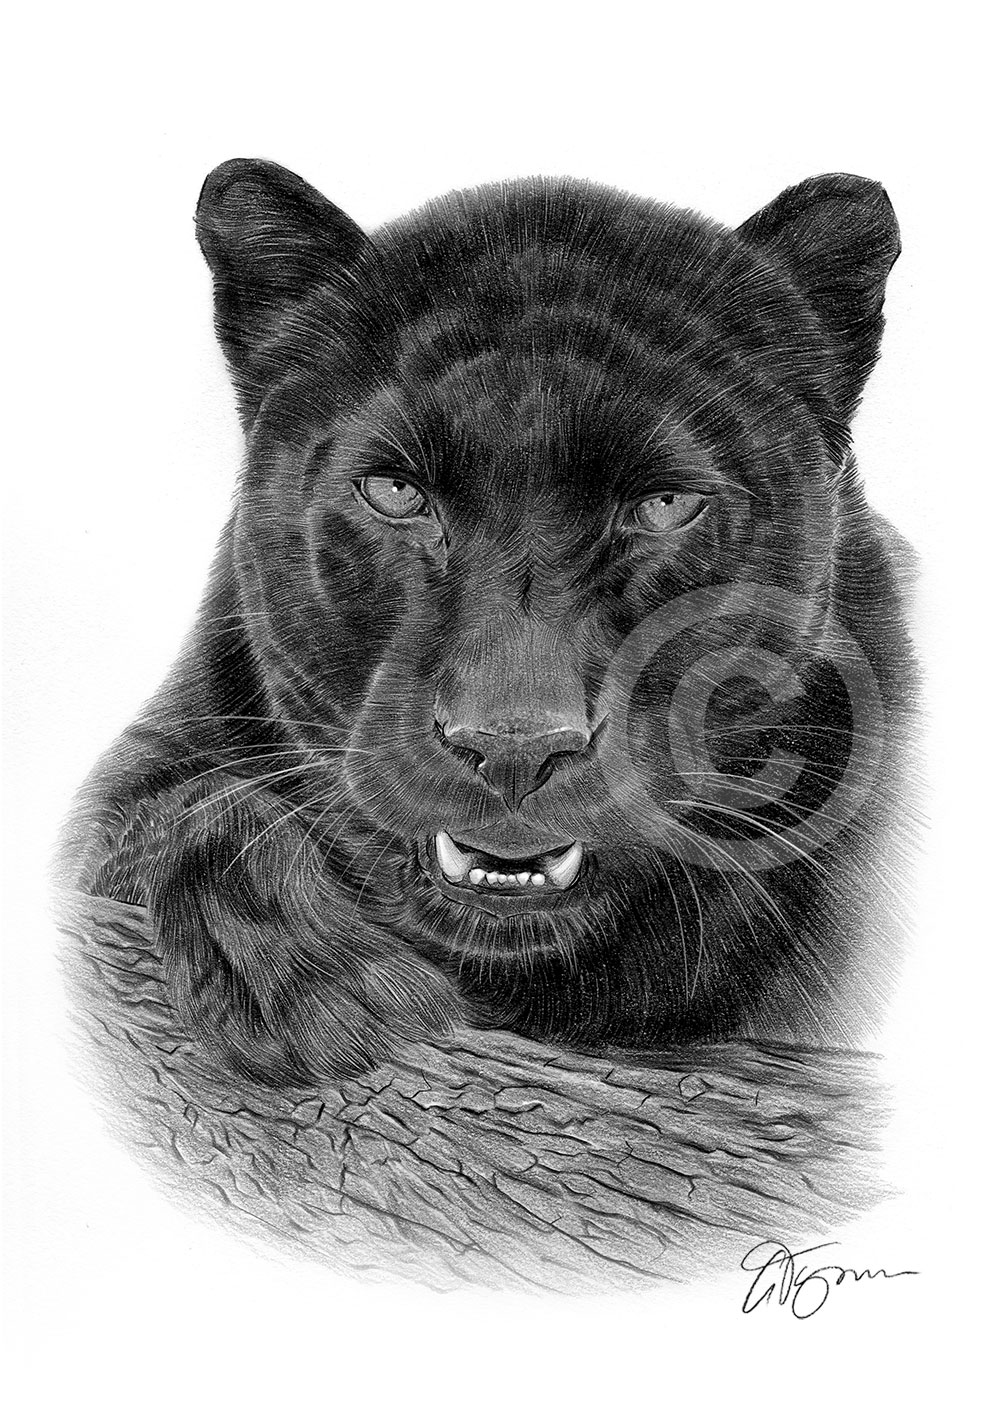 Pencil drawing of an adult black panther by artist Gary Tymon